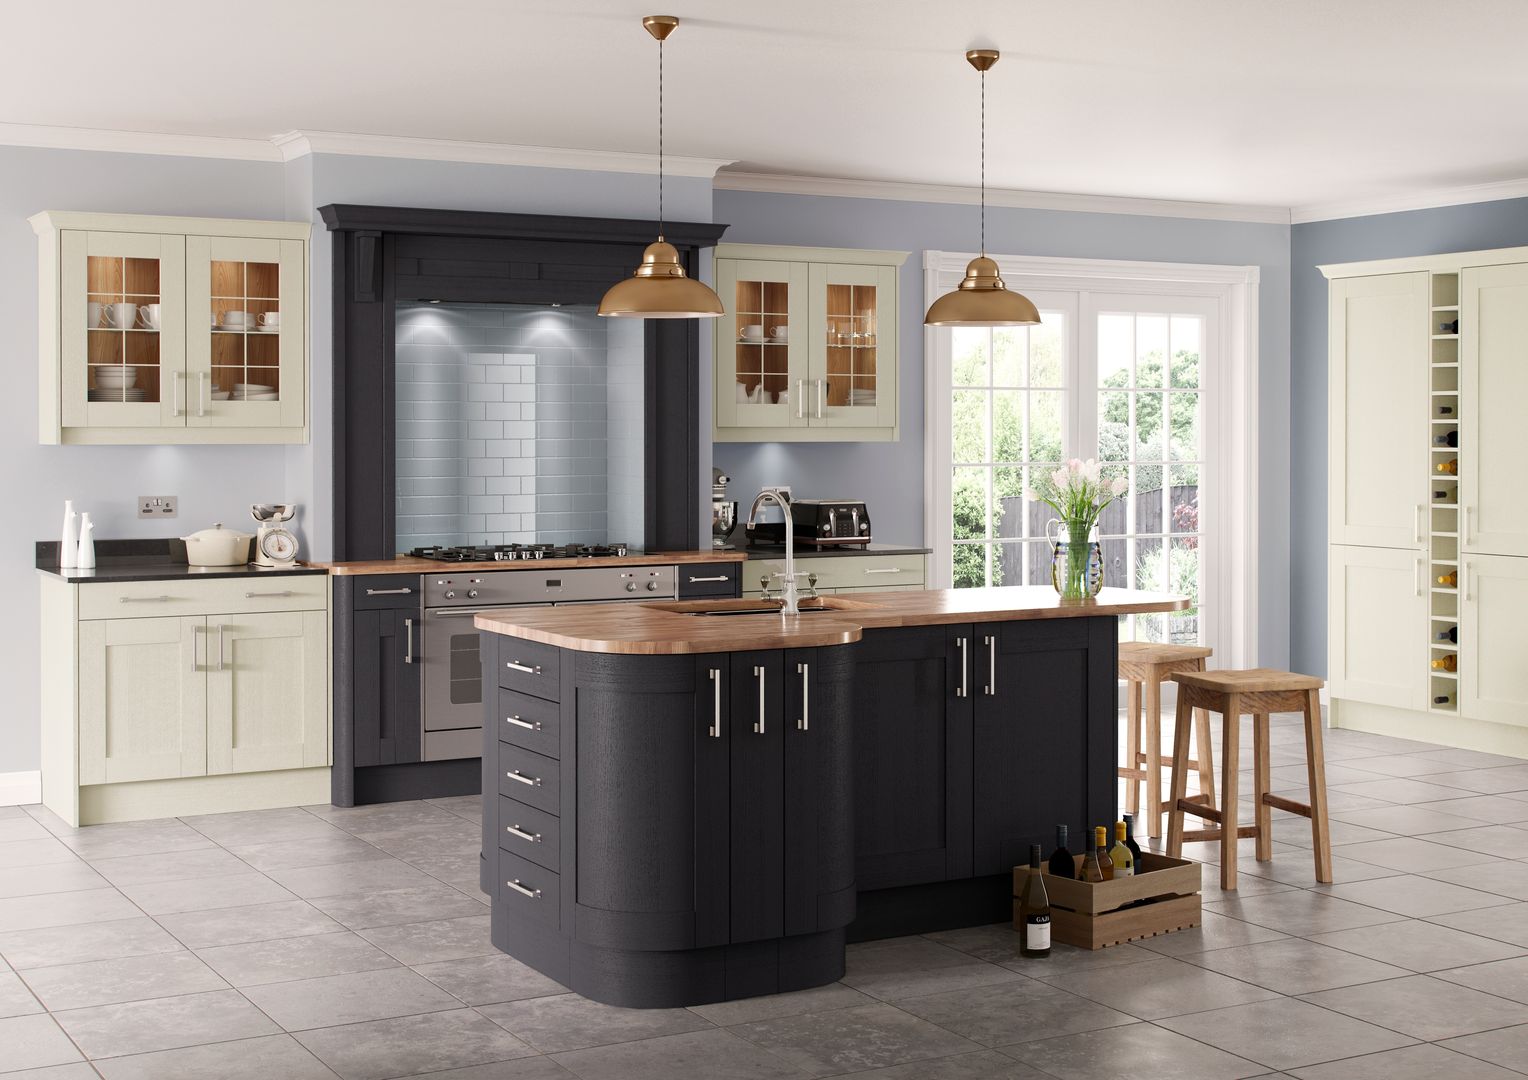 Saltaire Graphite and Ivory Painted Shaker Kitchen Sigma 3 Kitchens Dapur Klasik Cabinets & shelves